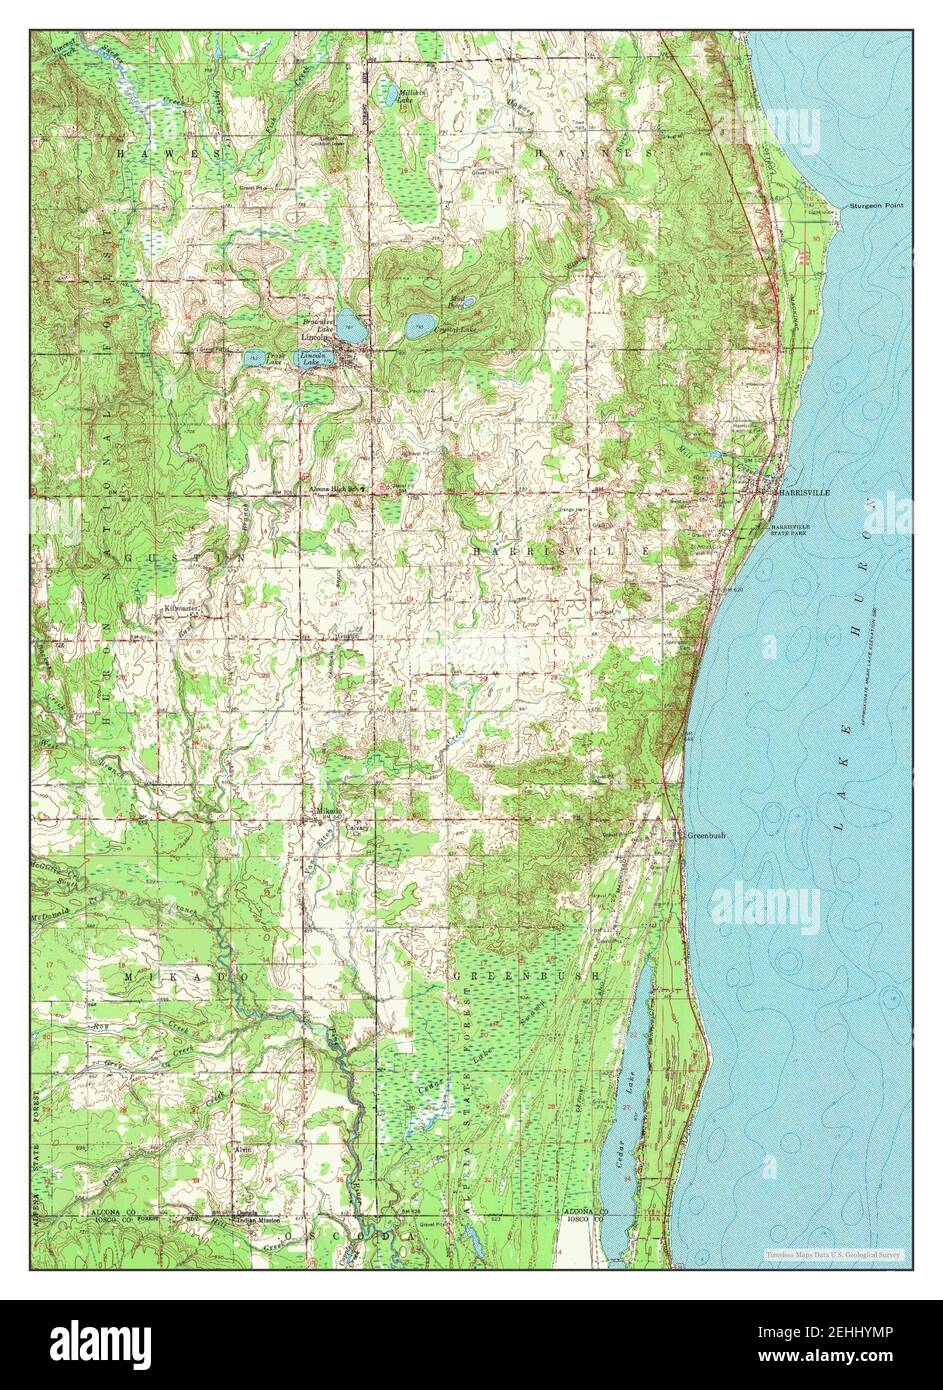 Harrisville, Michigan, map 1959, 1:62500, United States of America by Timeless Maps, data U.S. Geological Survey Stock Photo